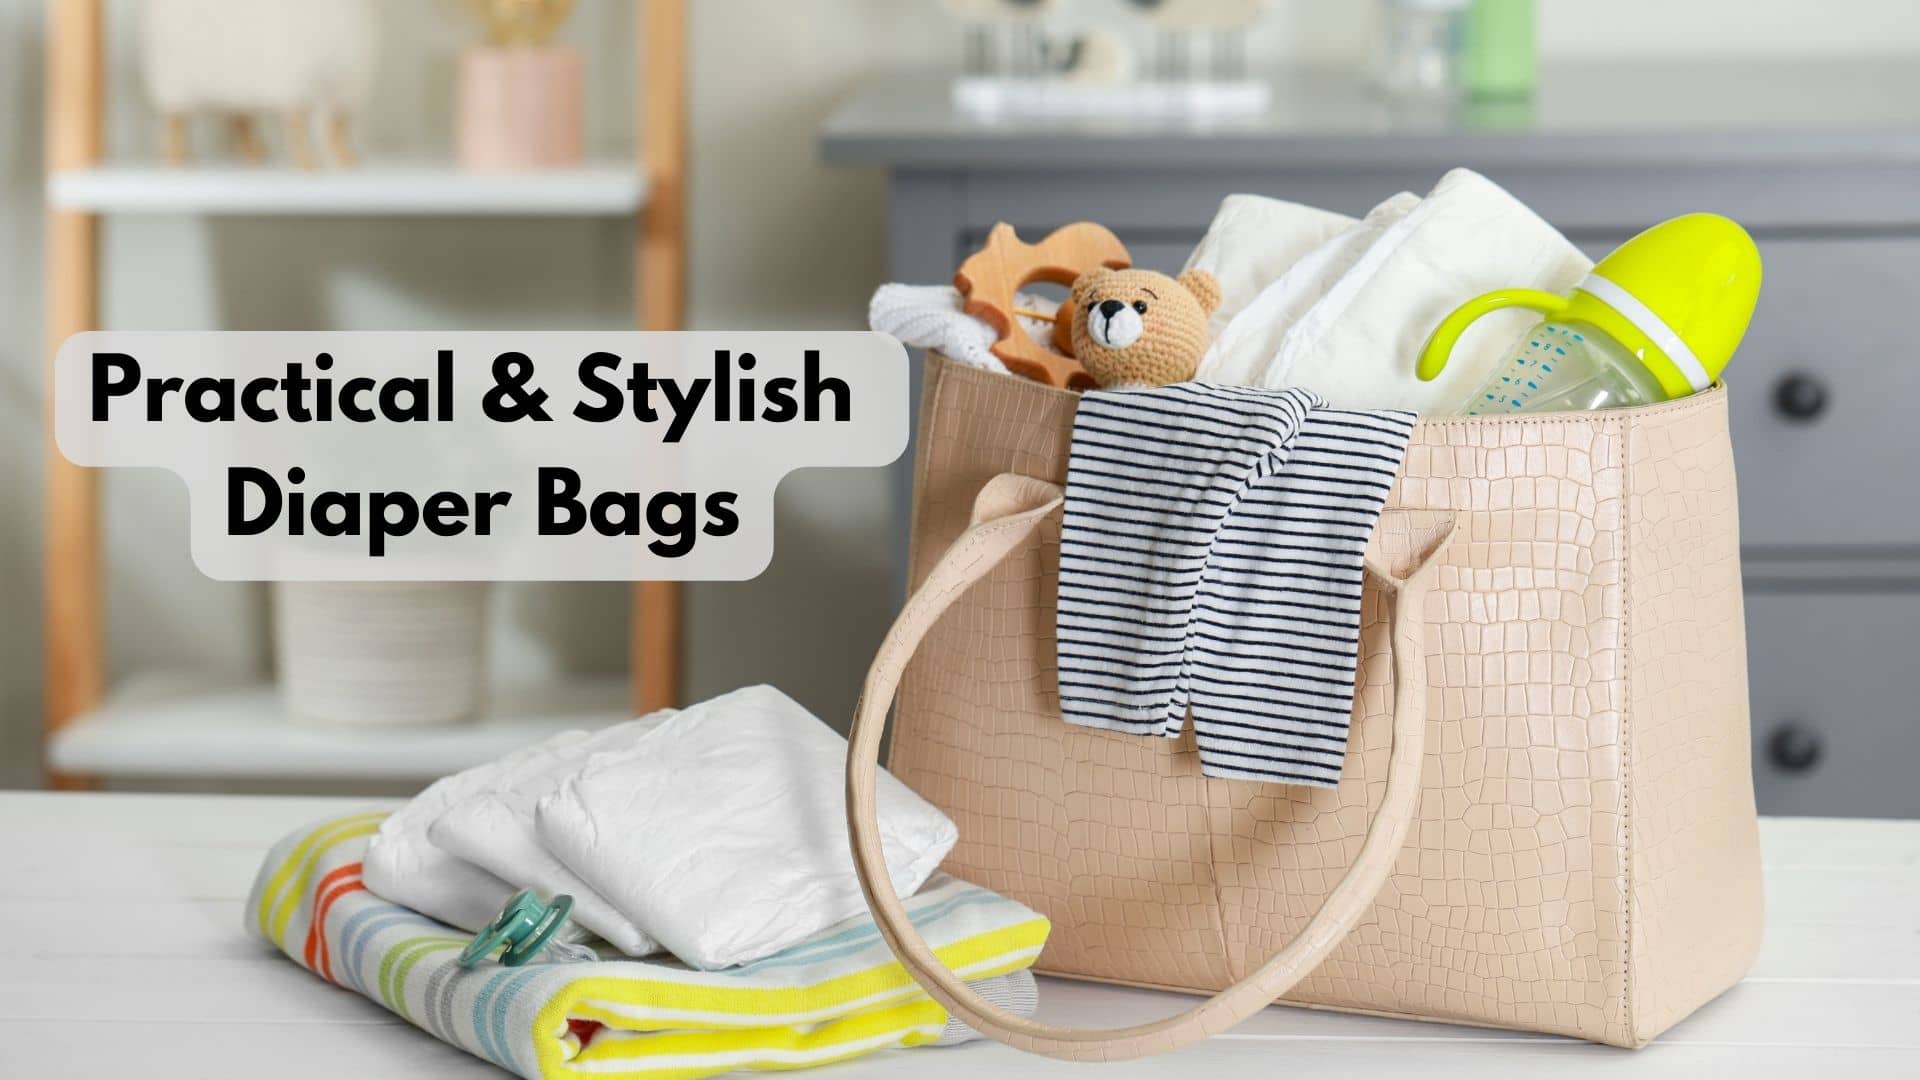 What Are Some Practical And Stylish Diaper Bags?